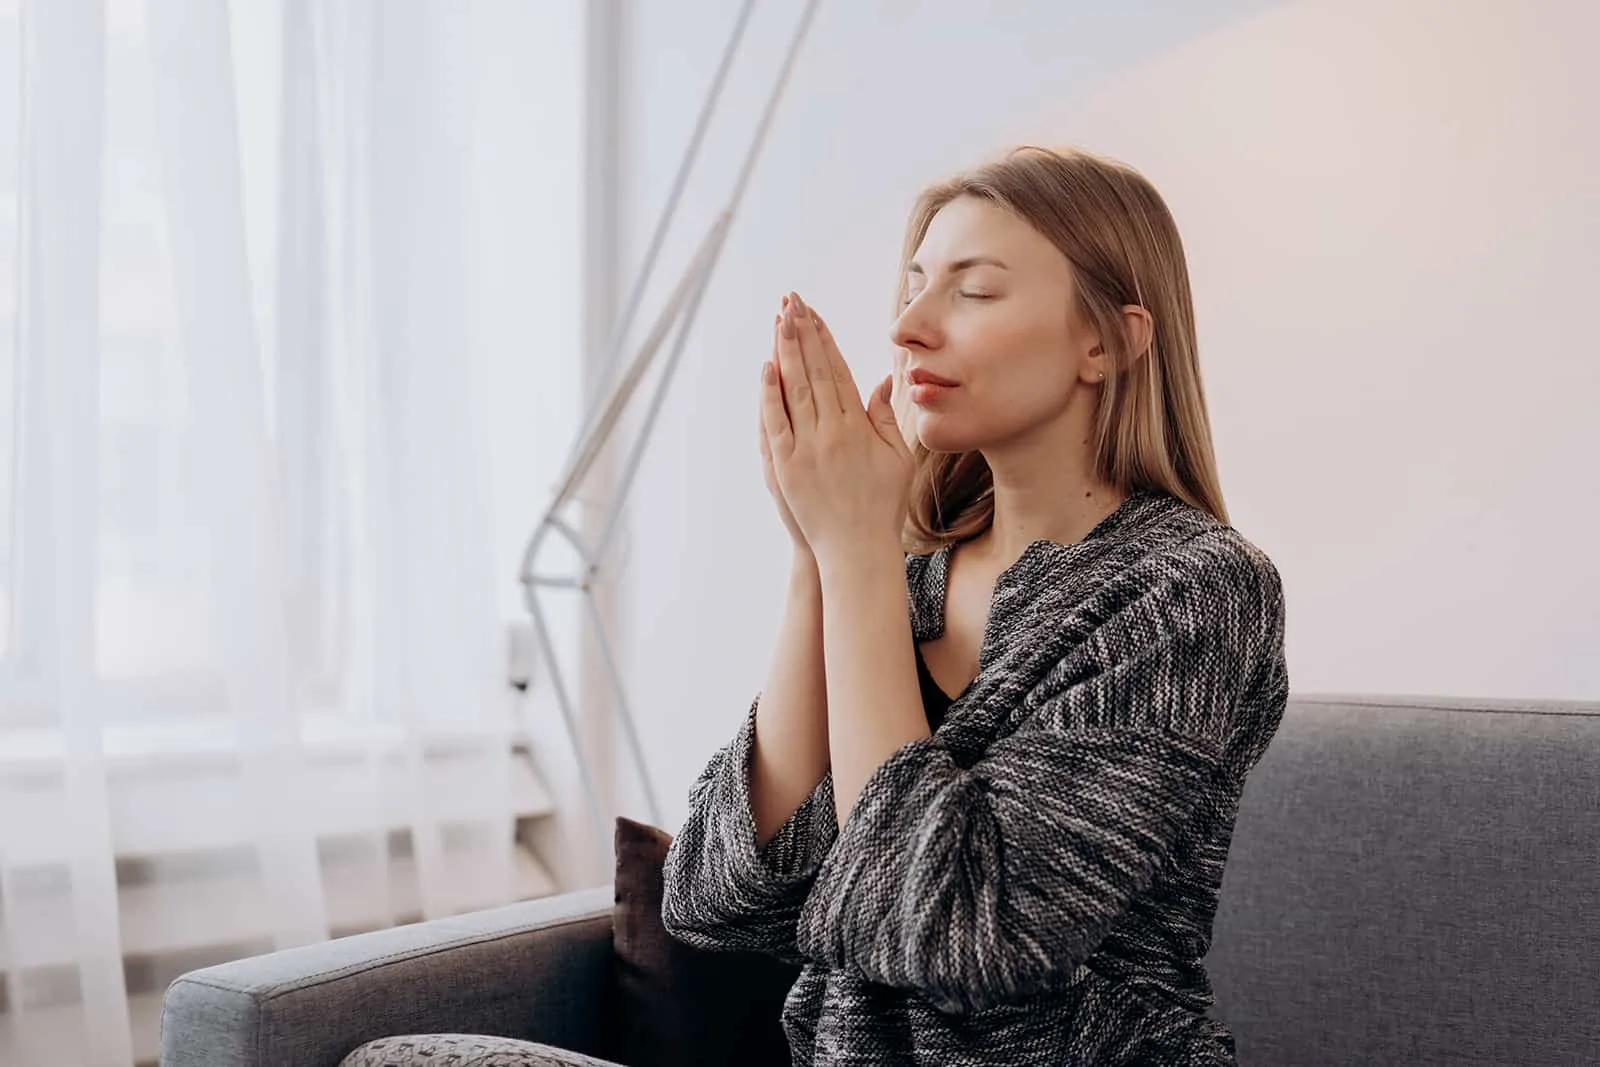  woman praying with eyes closed while sitting on couch